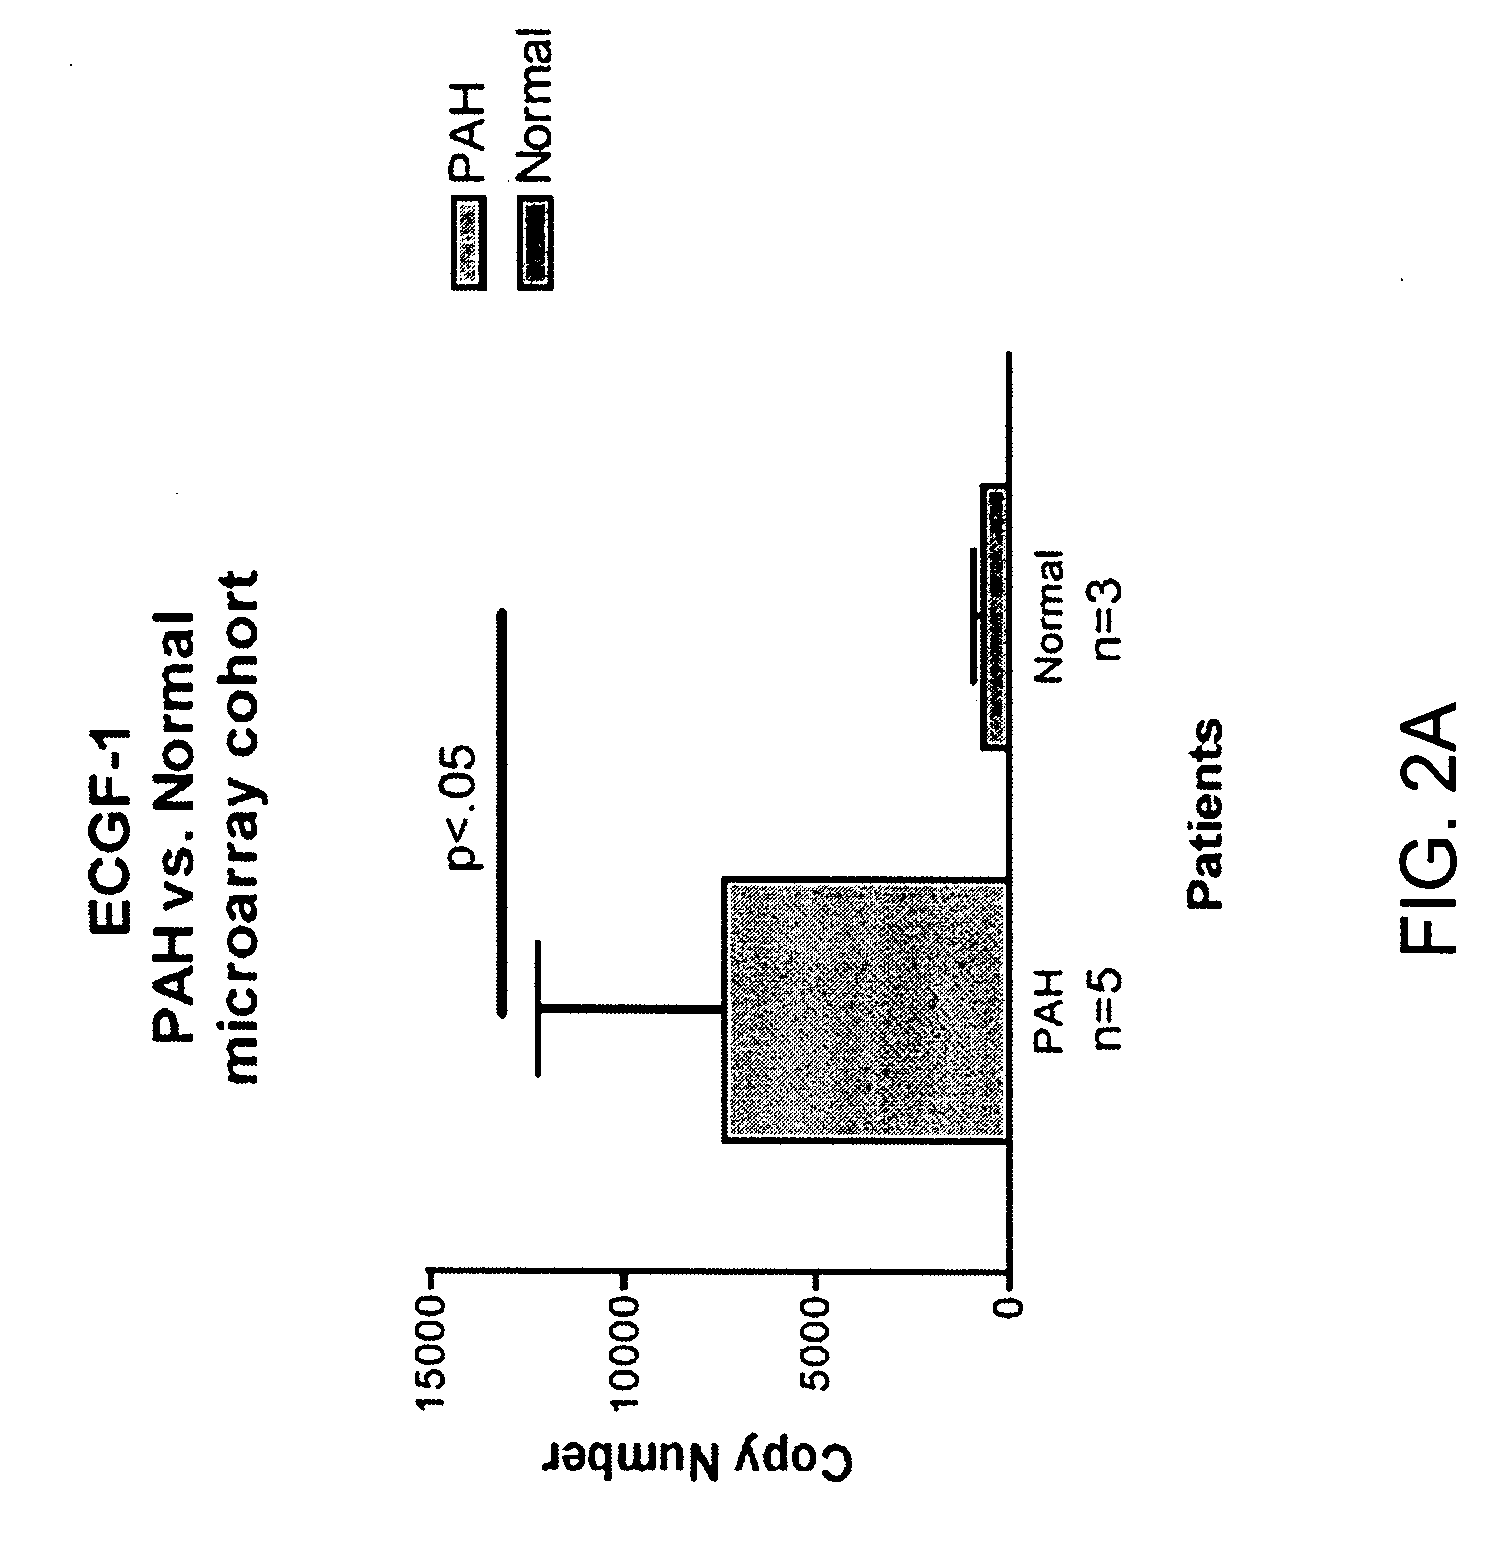 Diagnosis of disease and monitoring of therapy using gene expression analysis of peripheral blood cells